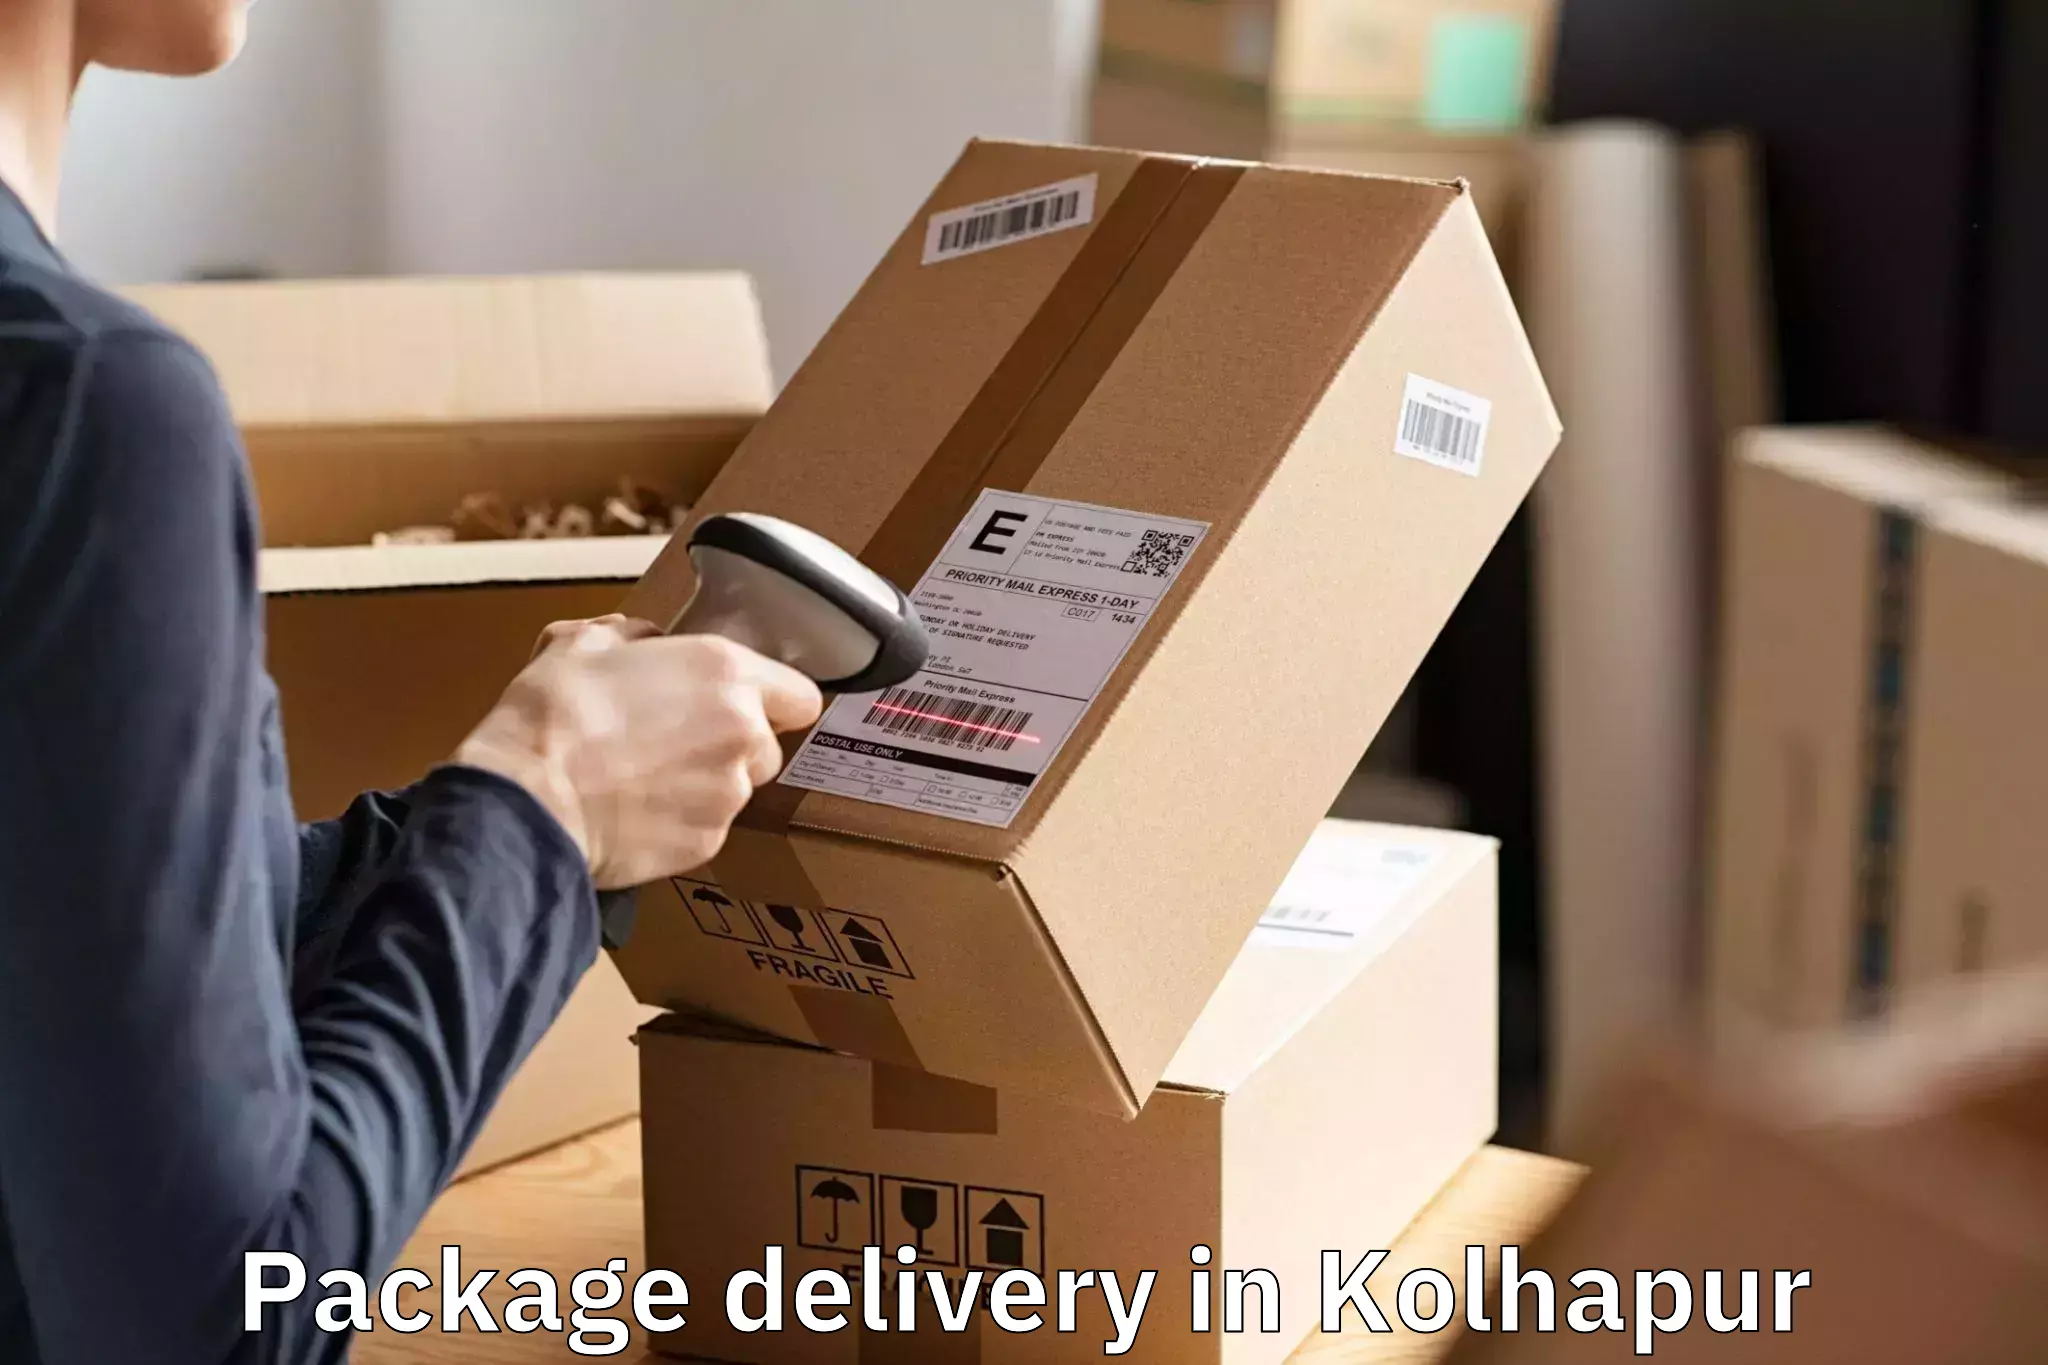 Easy Package Delivery Booking in Kolhapur, Maharashtra (MH)